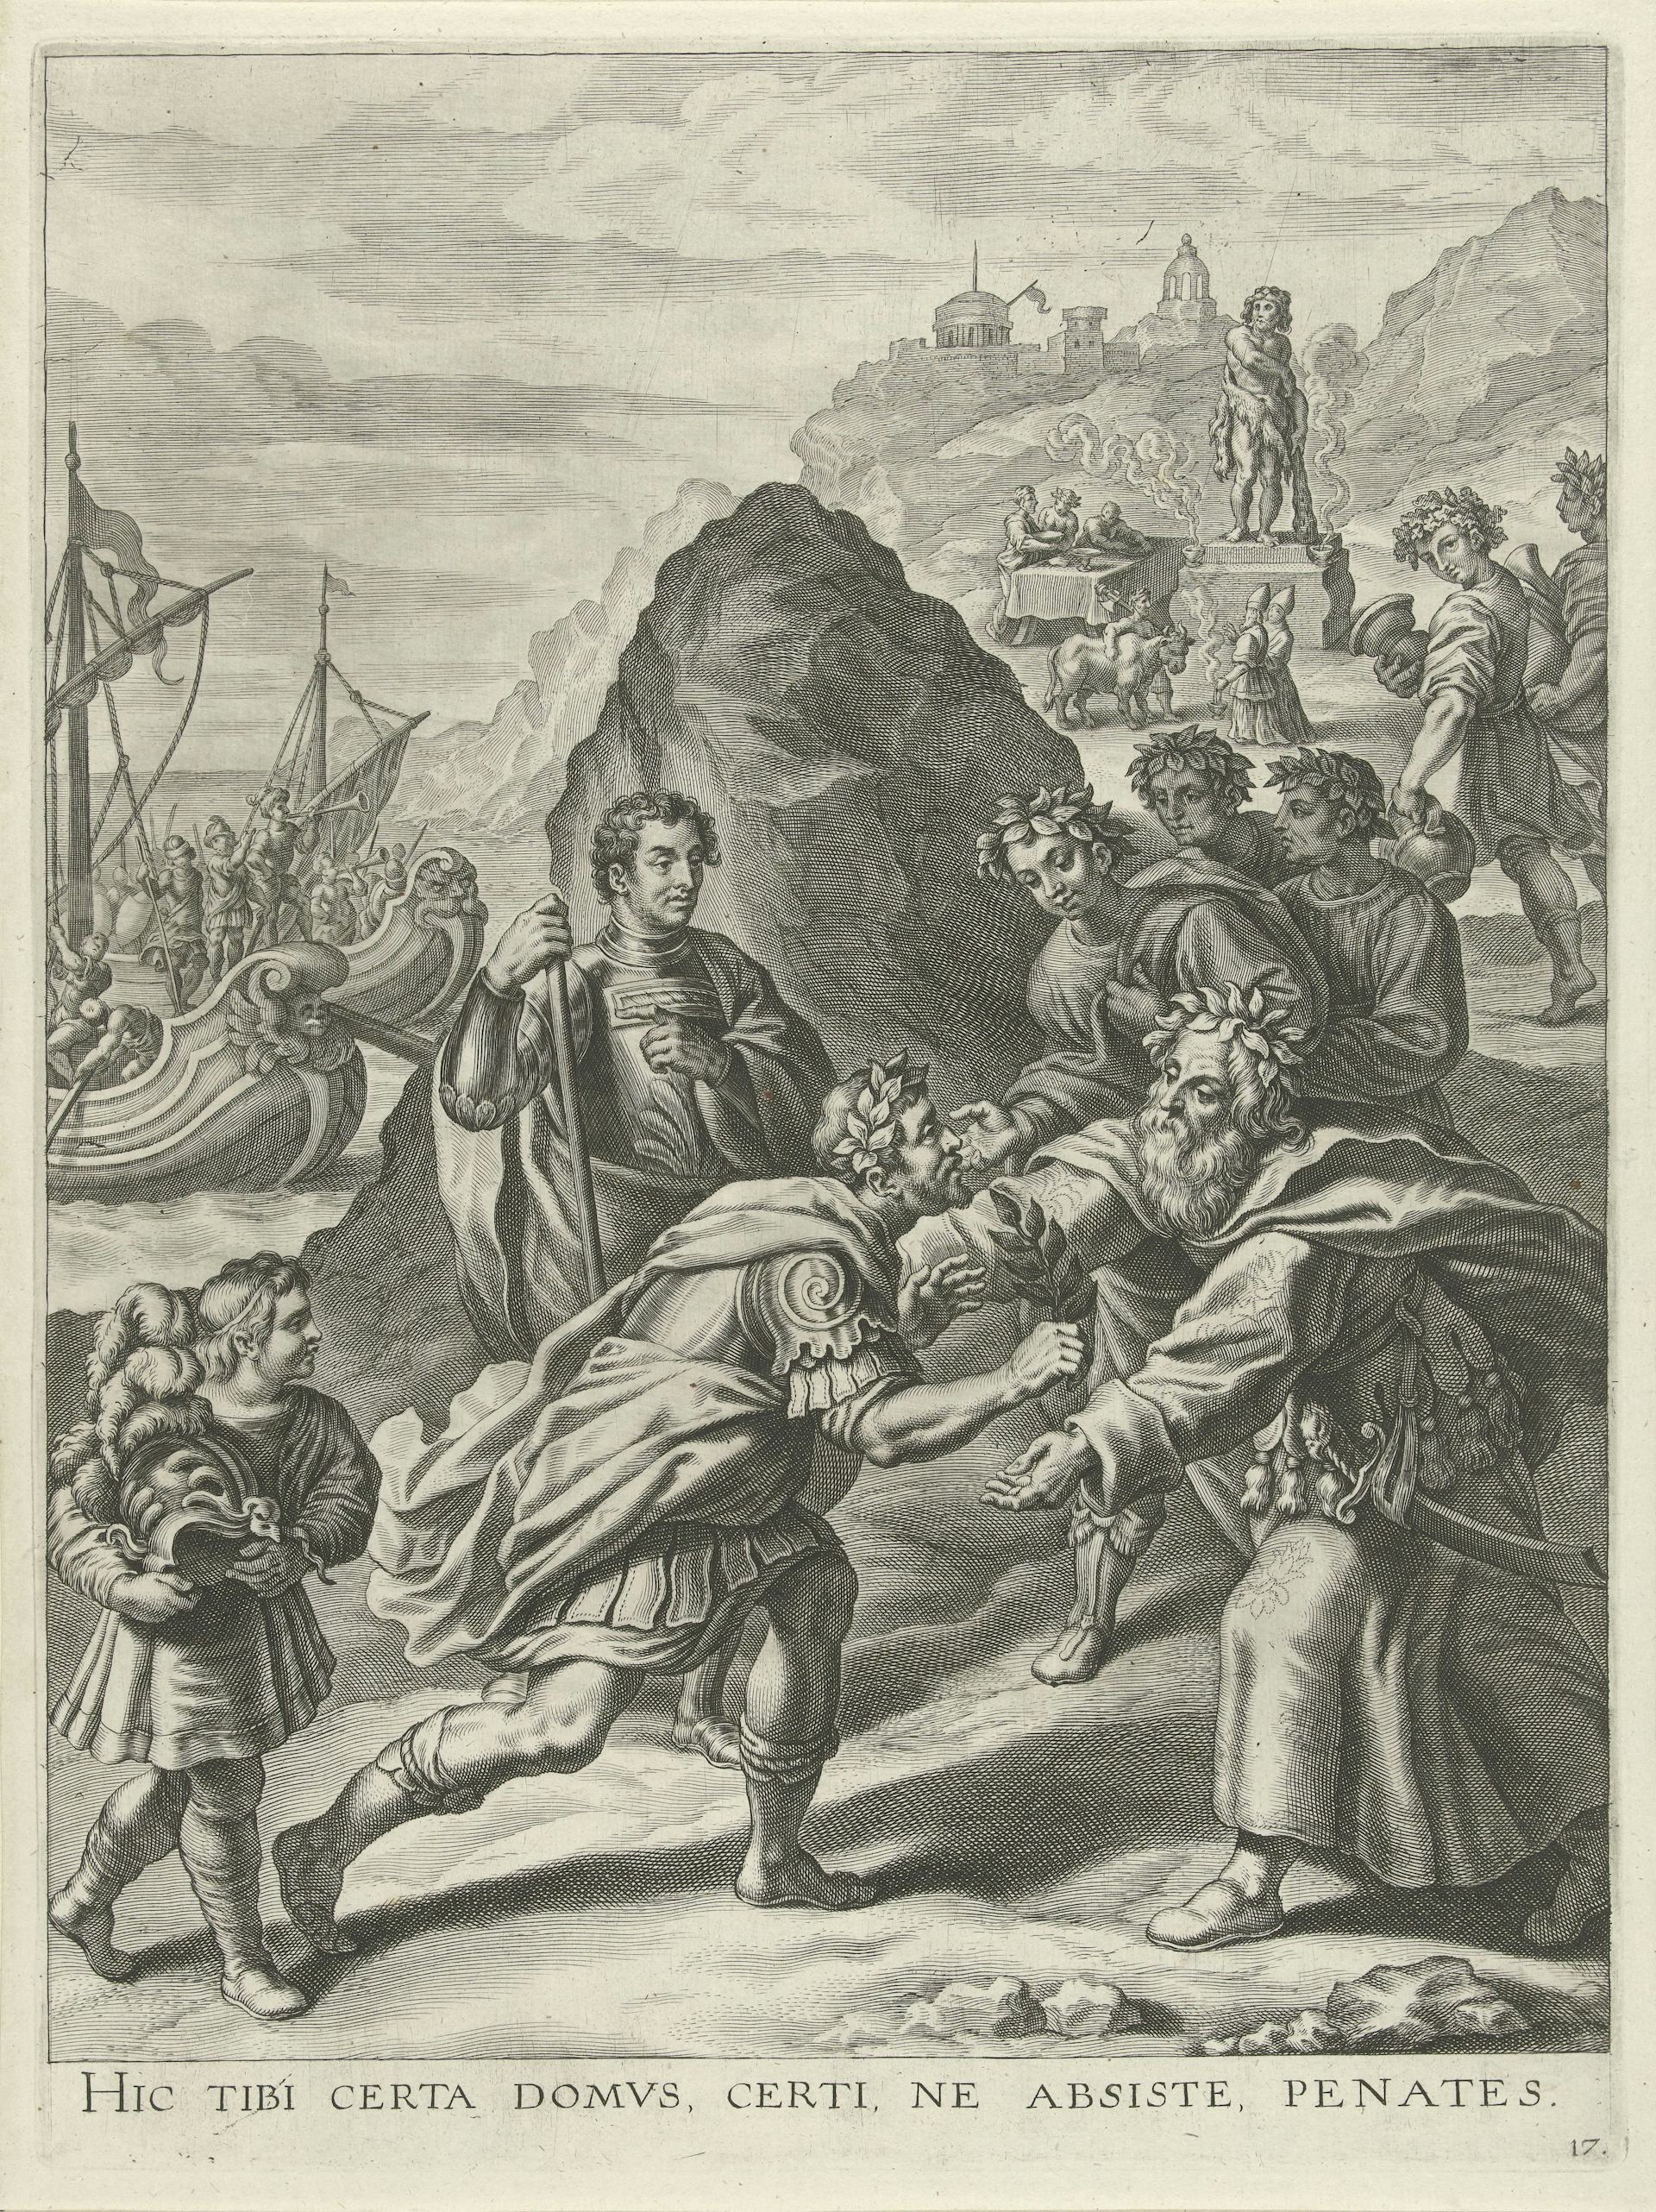 Aeneas Accepting the Hospitality of Evander in Italy by Cornelis Galle, after Nicolas de Liemaker, after Peter Paul Rubens